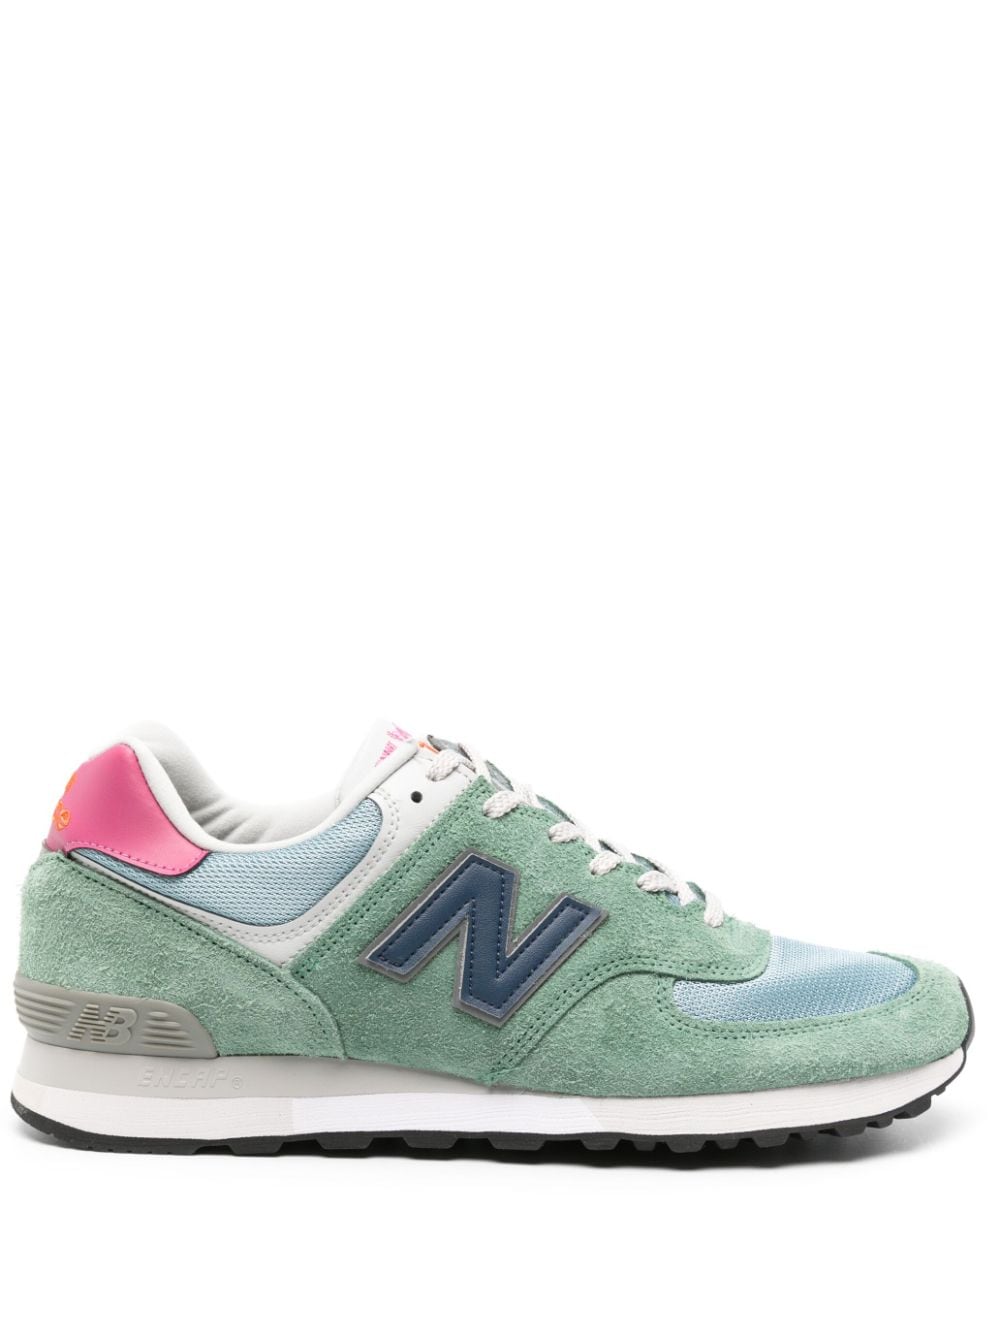 New Balance Miuk Low Top Snkr Lthr Grn In Green